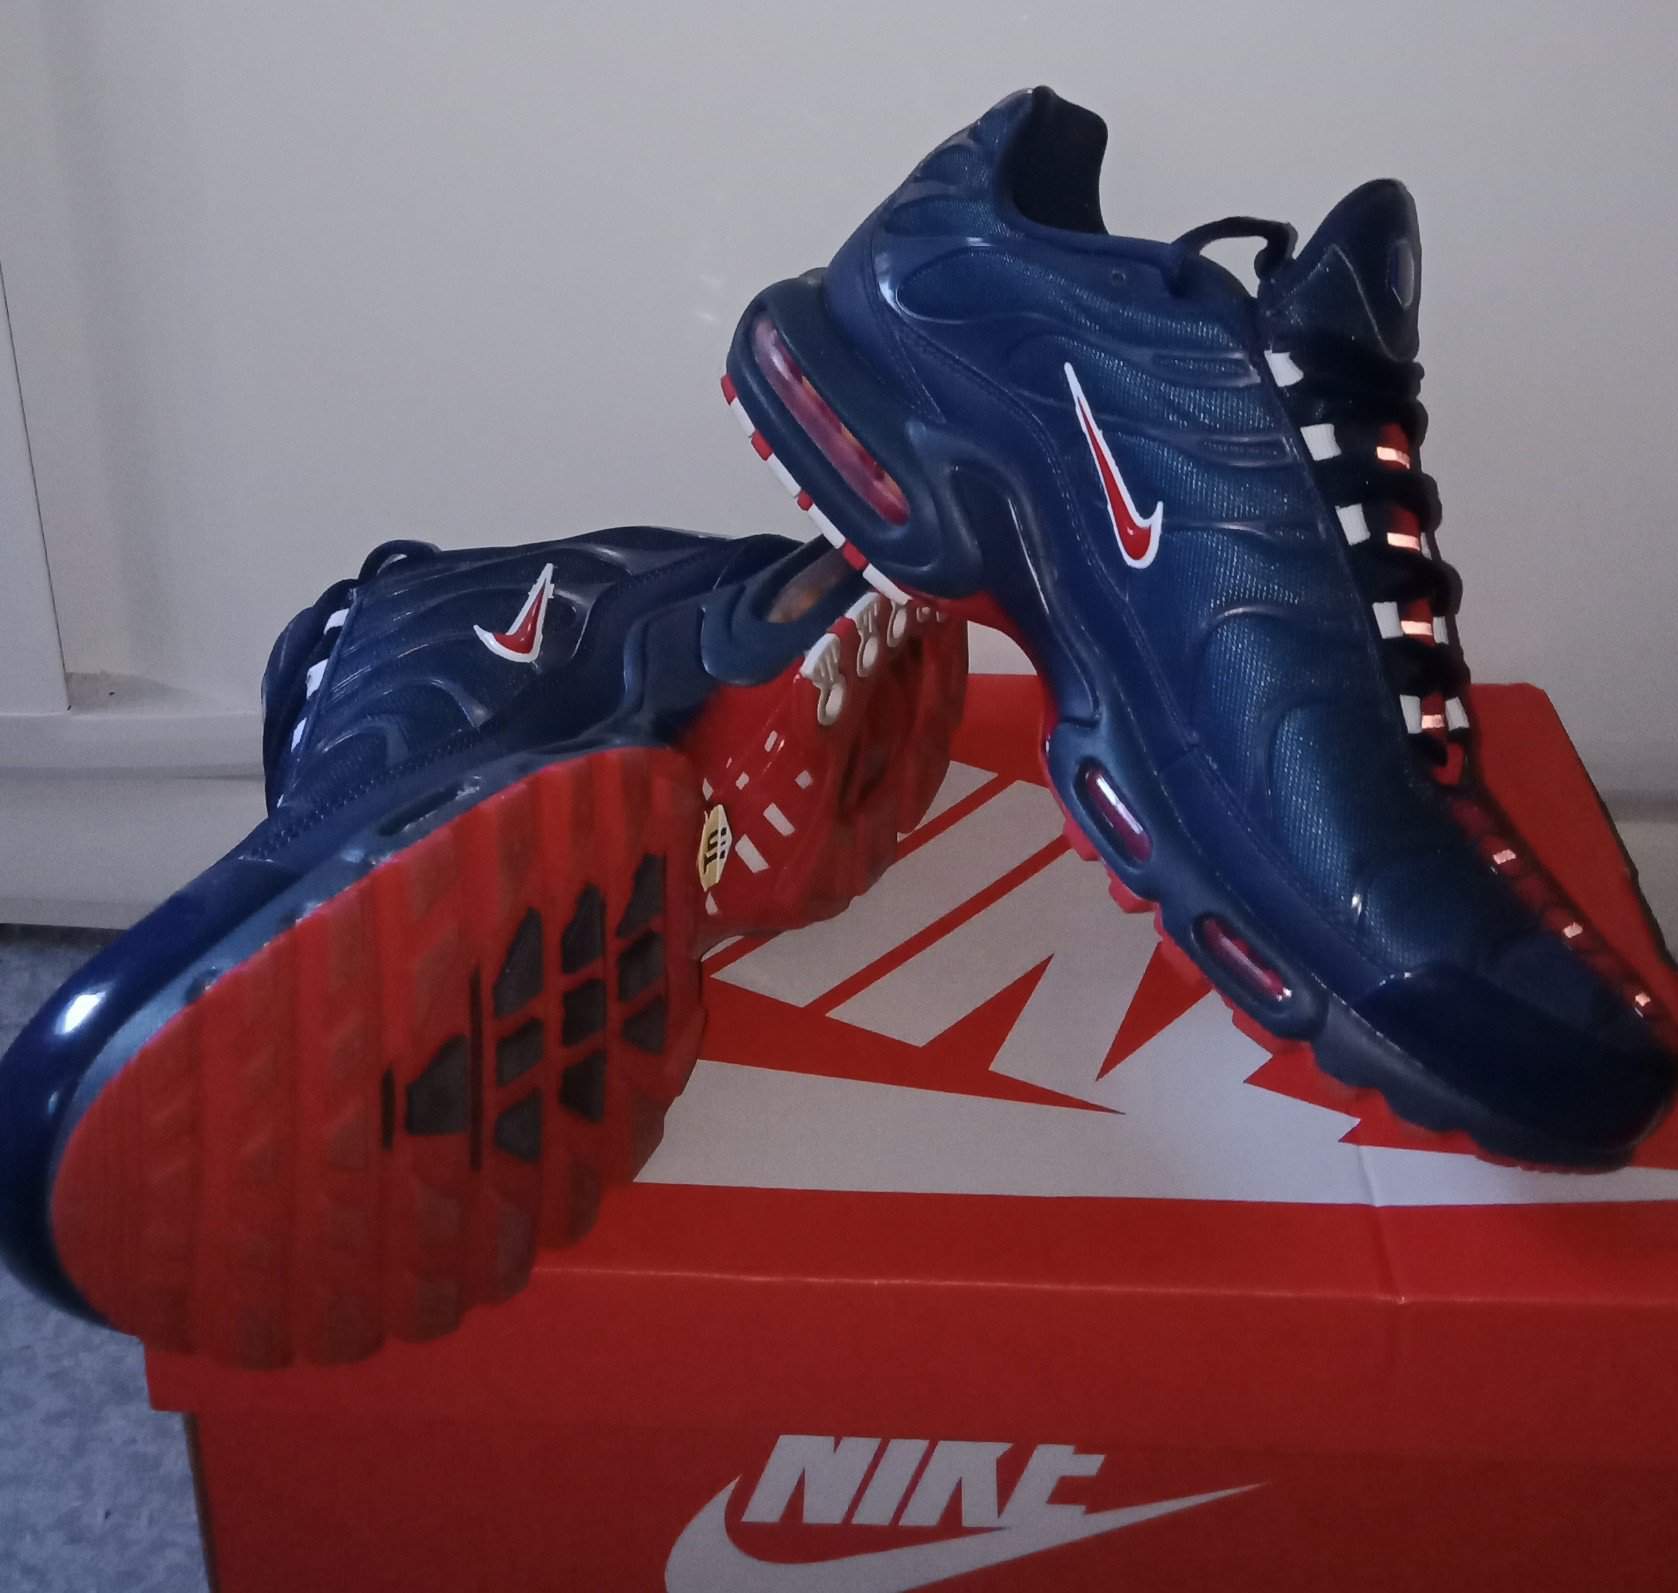 chant pretend Melodic Nike Air Max Plus TN Midnight-Blue/University-Red (French Derby) |  Sneakerheads Amino